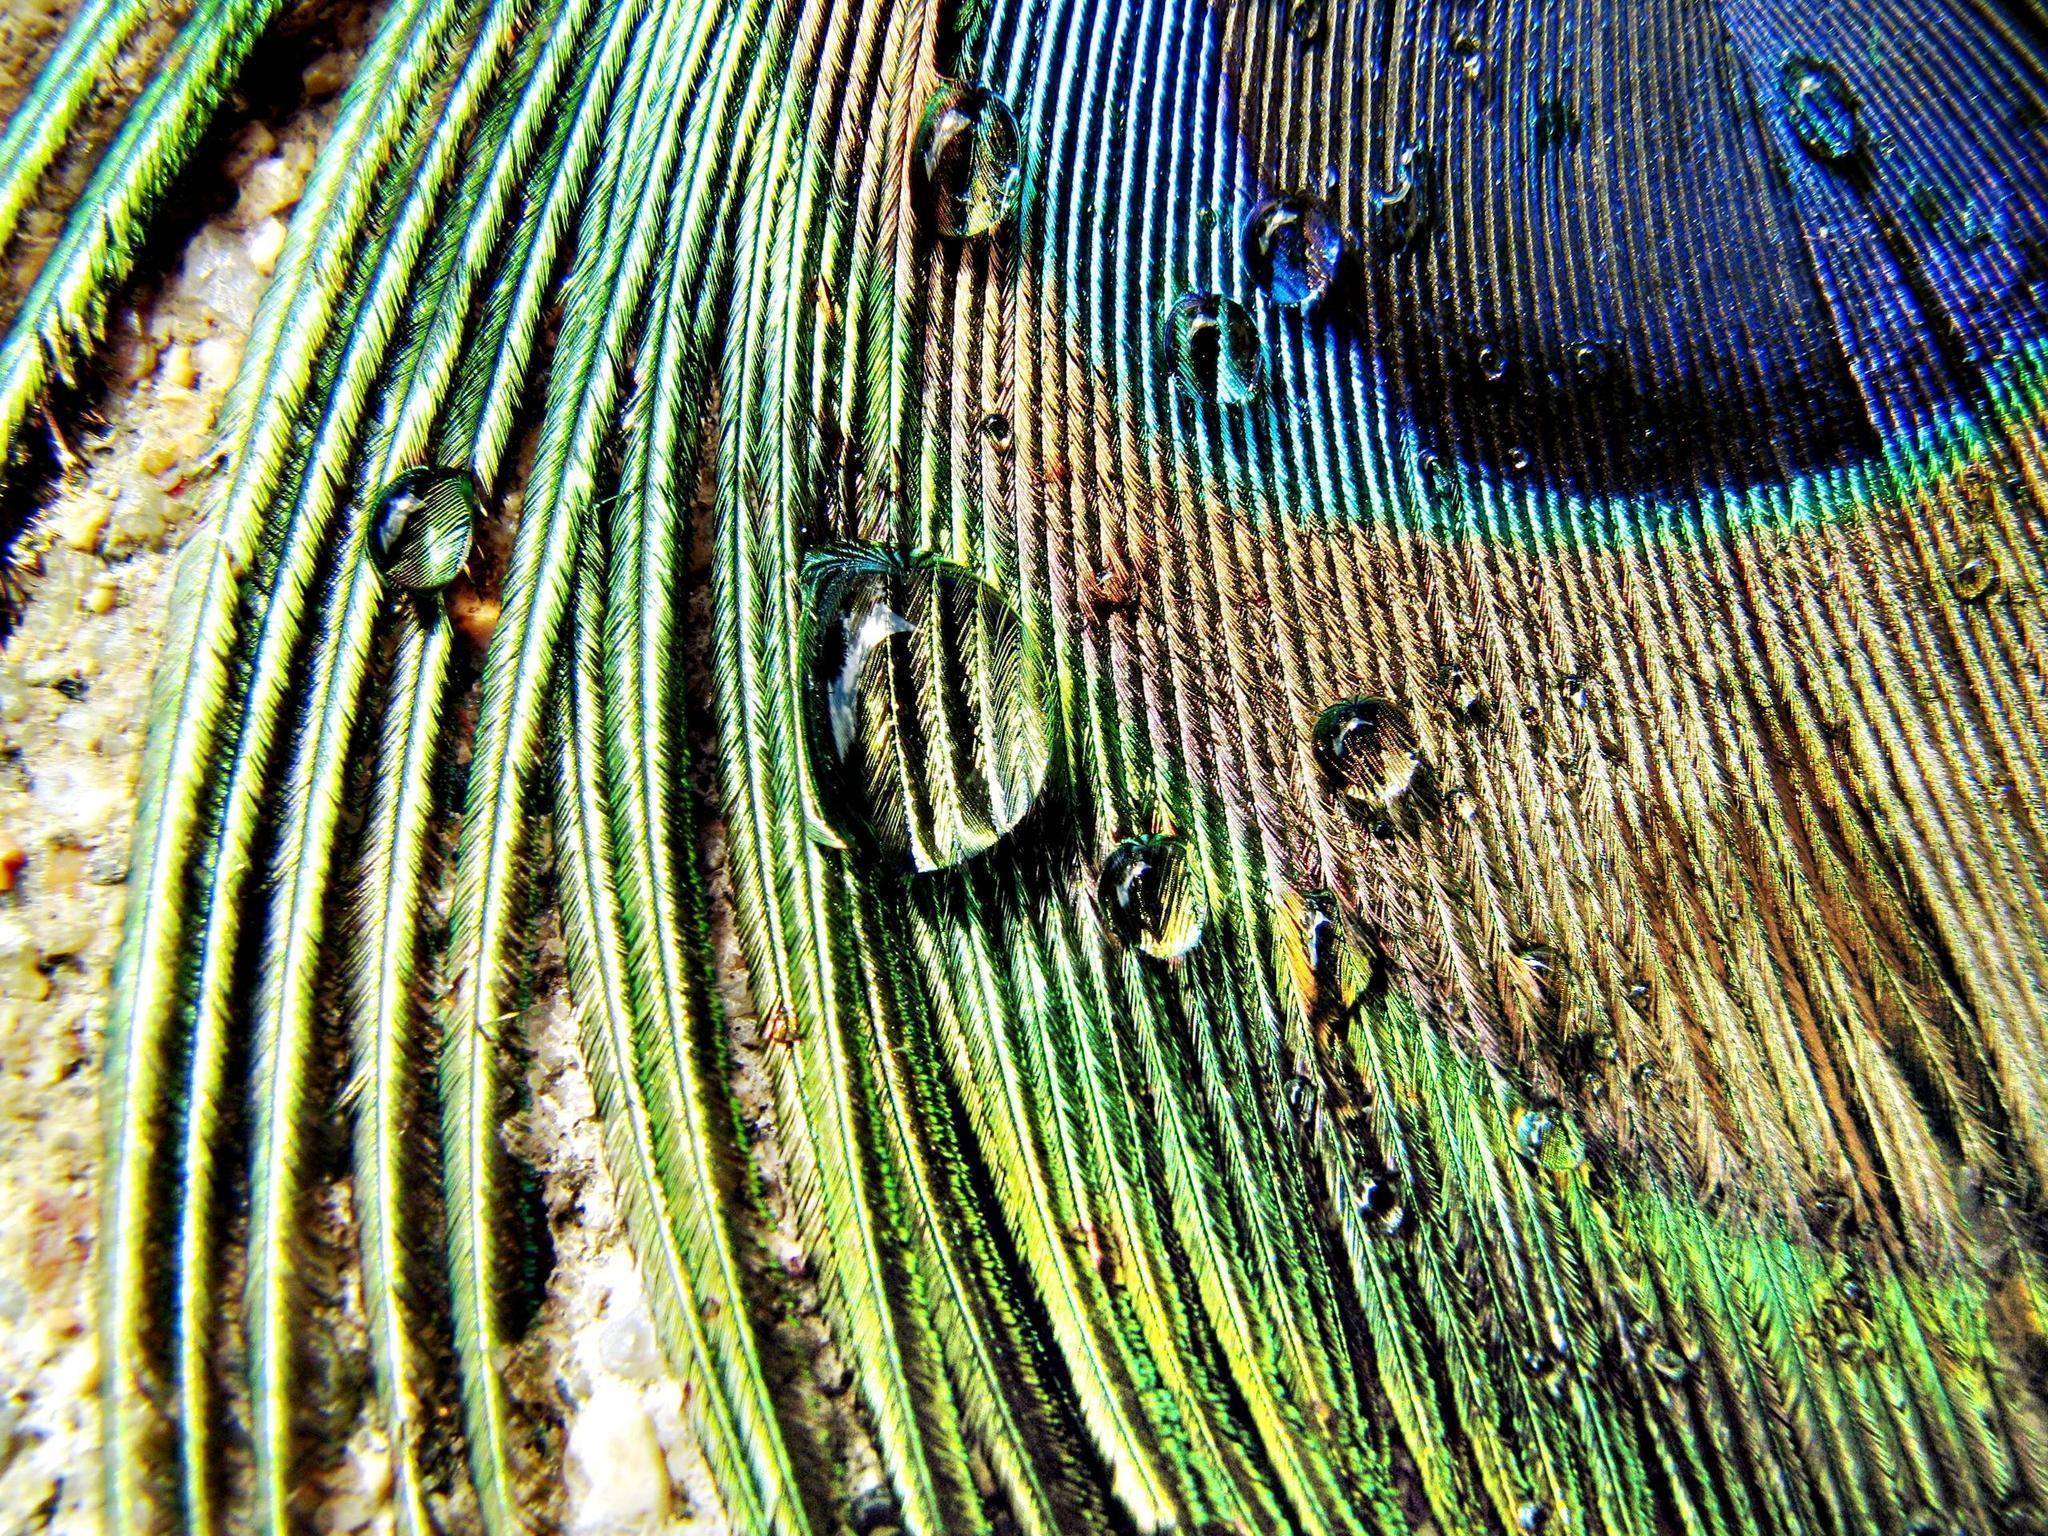 Peacock Feather Macro Wallpaper 2560x1920 px Free Download